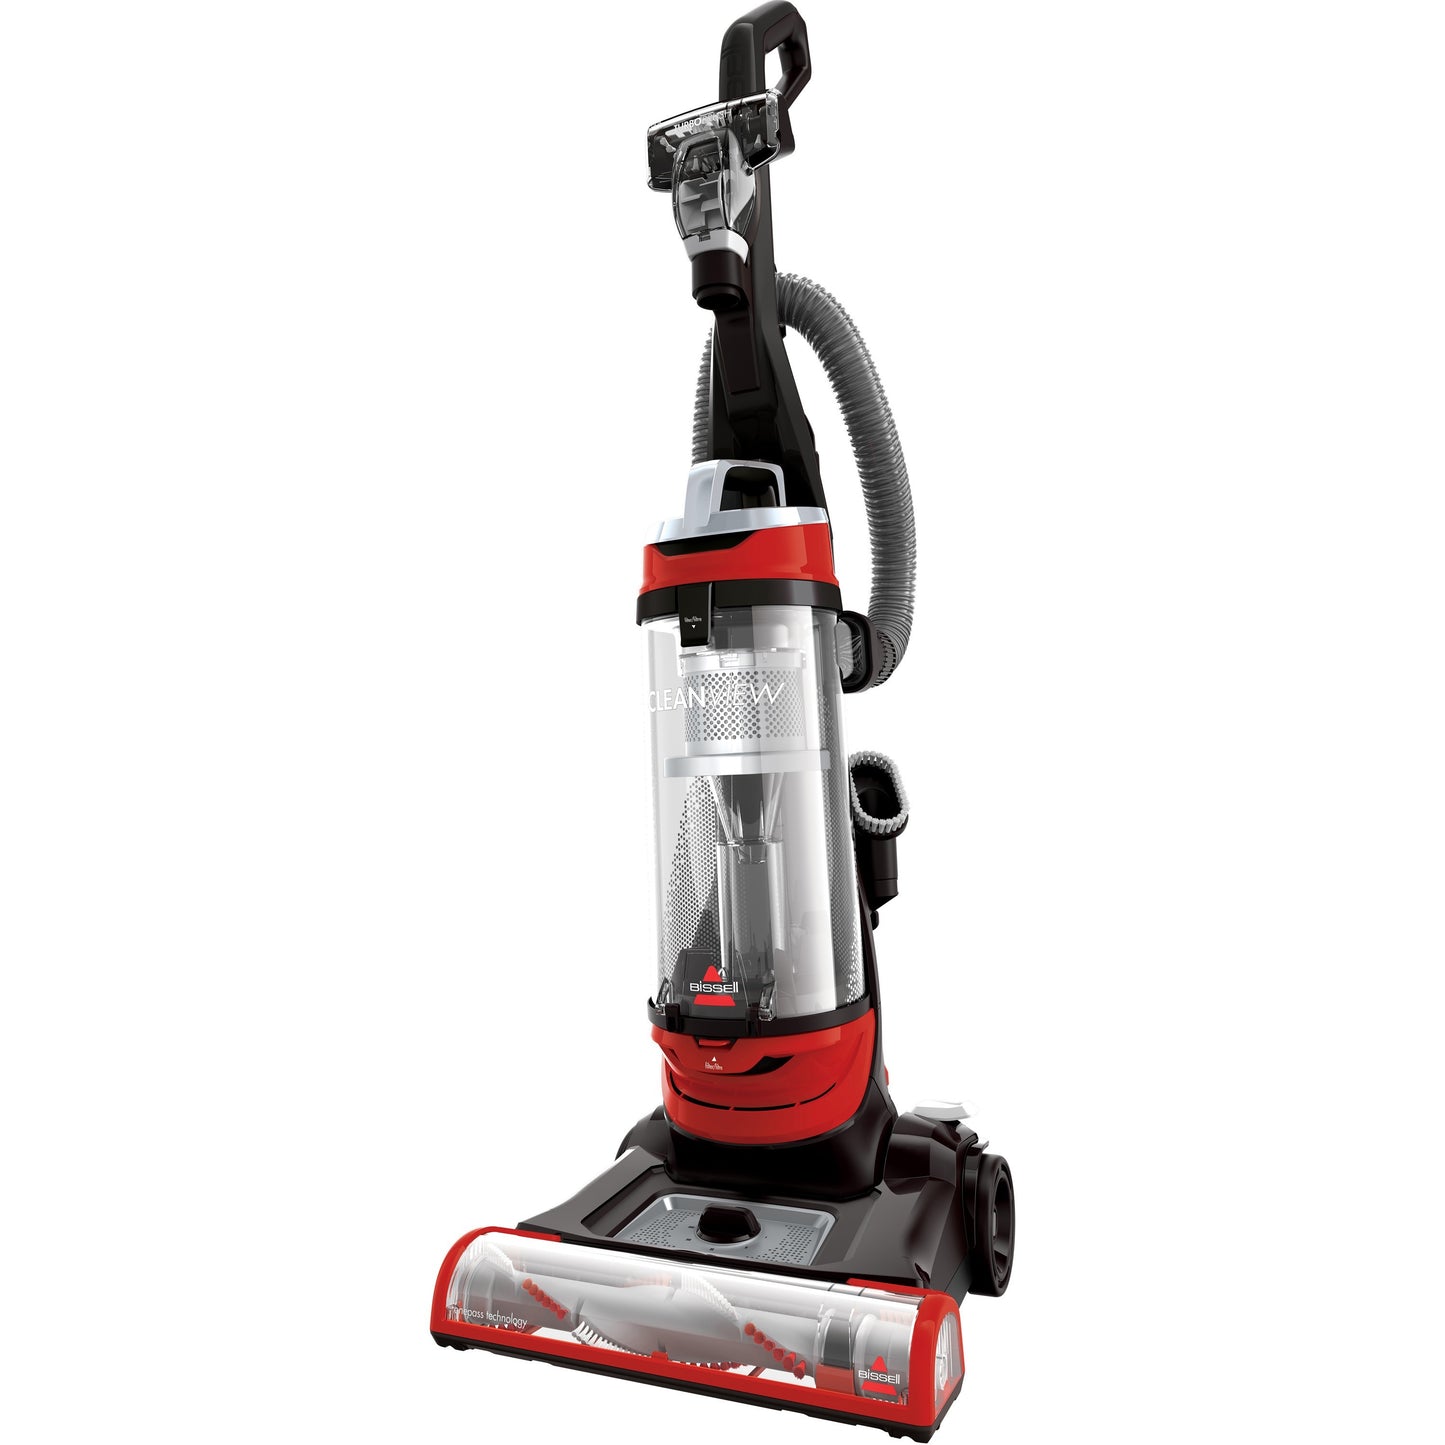 BISSELL CleanView Upright Vacuum